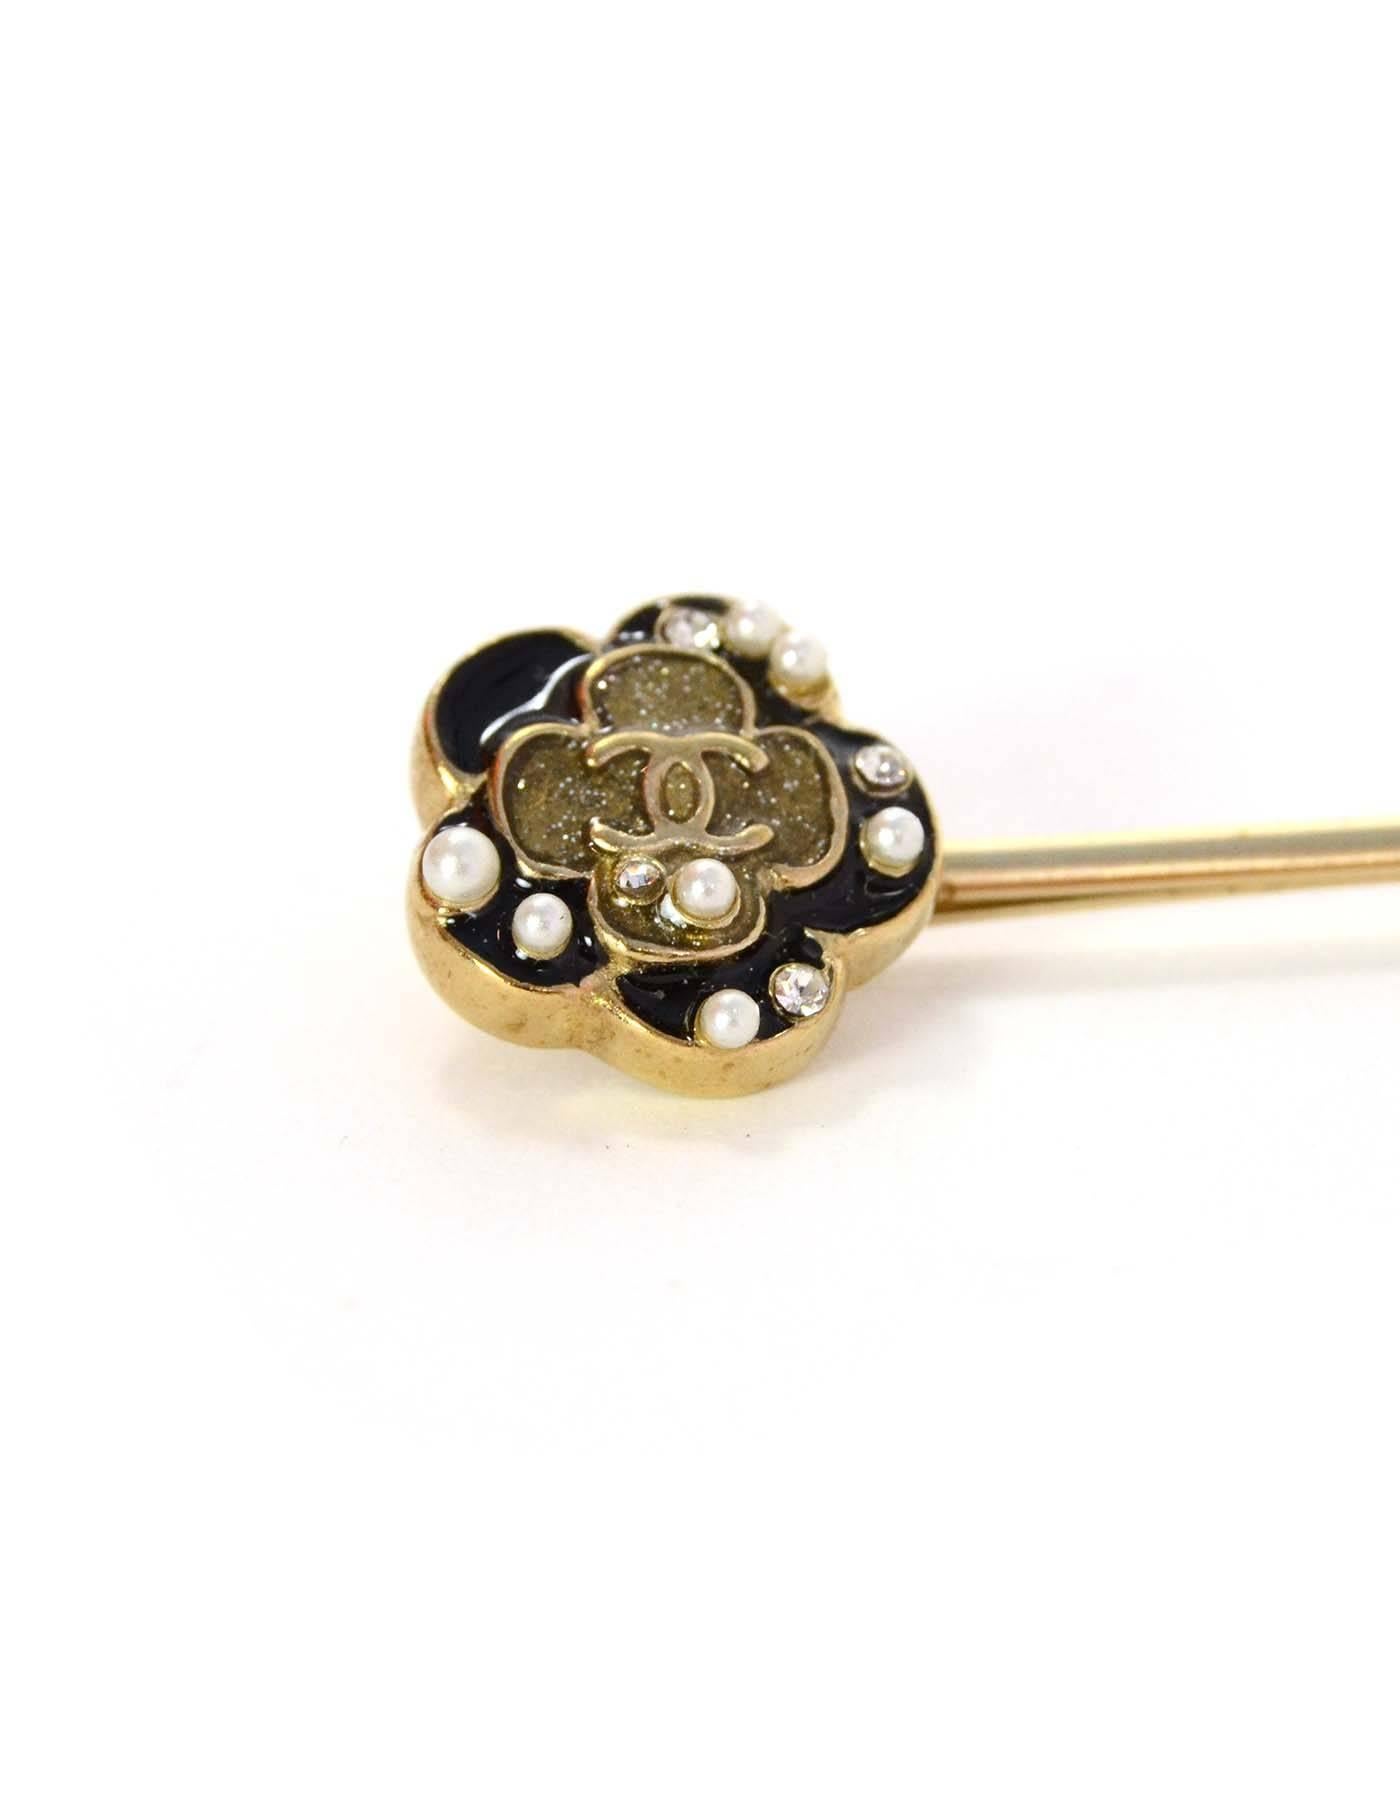 Chanel Gold & Black Camelia Flower Hair Pin 
Features small CC in center of Camelia flower with crystals and faux pearls surrounding it
Color: Goldtone, black, and ivory
Materials: Metal, enamel, crystal and faux pearl
Closure: None
Overall